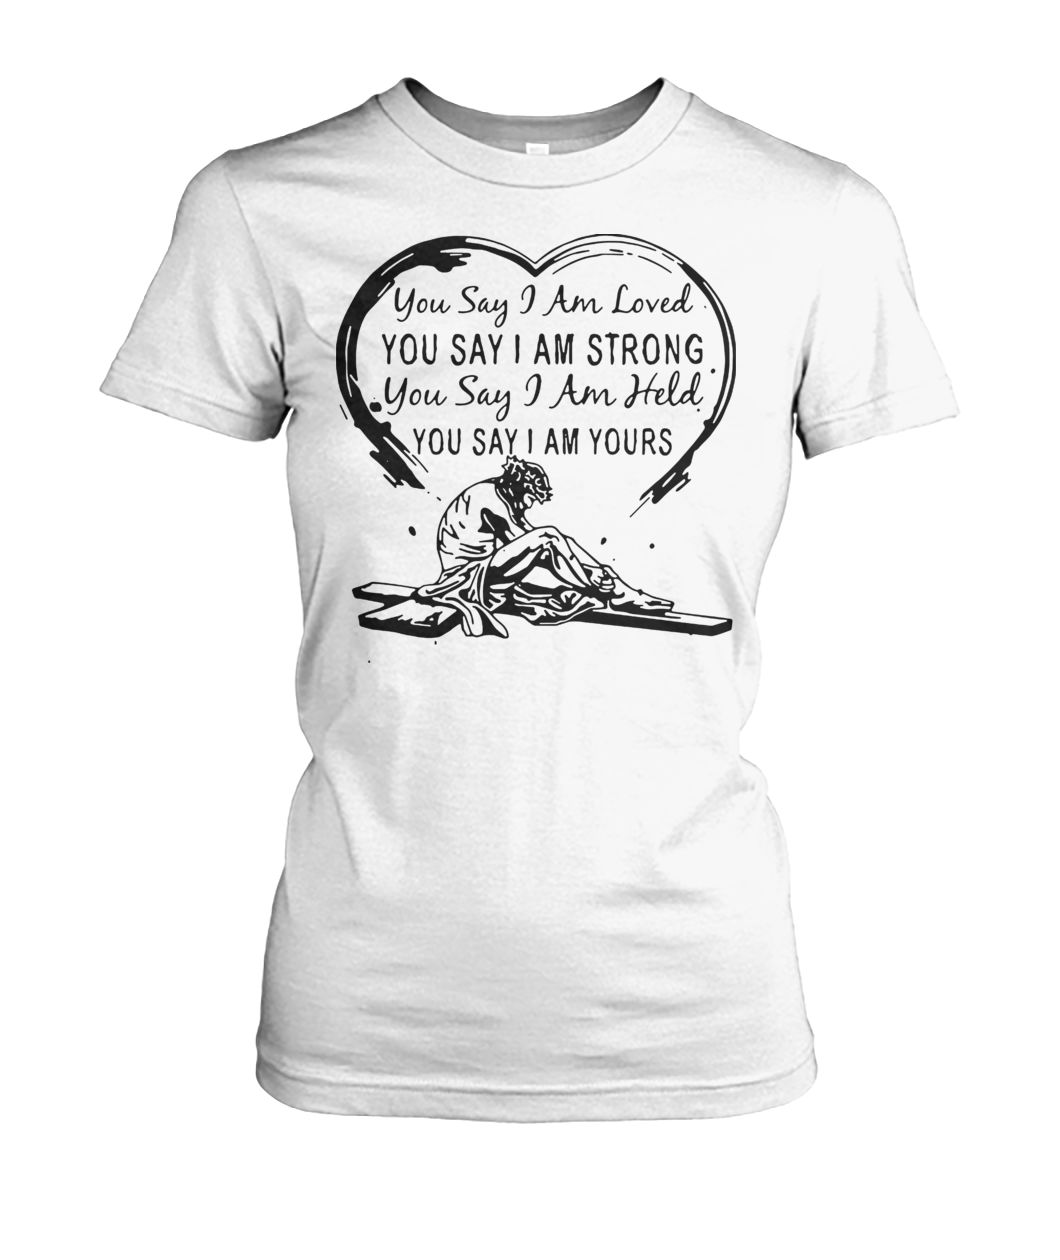 Christian jesus you say I am loved you say I am strong you say I am held you say I am yours women's crew tee